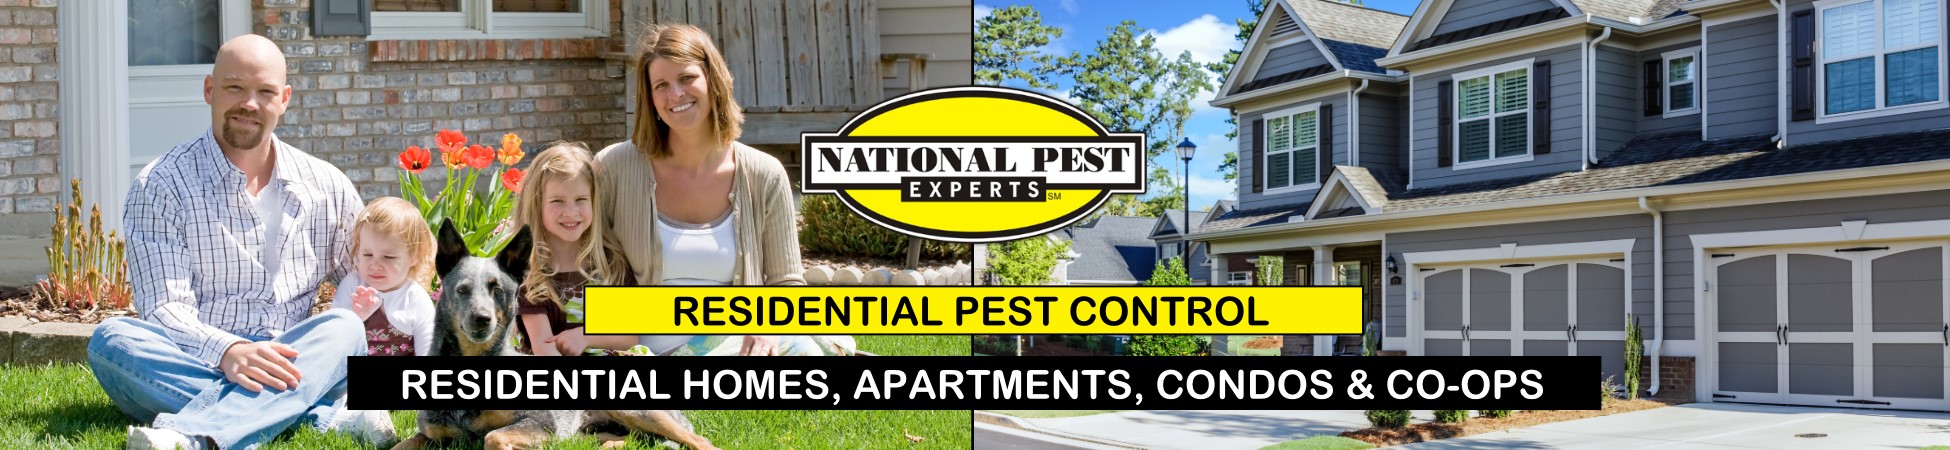 National Pest Experts - Residential exterminating and pest control in Holtsville, NY